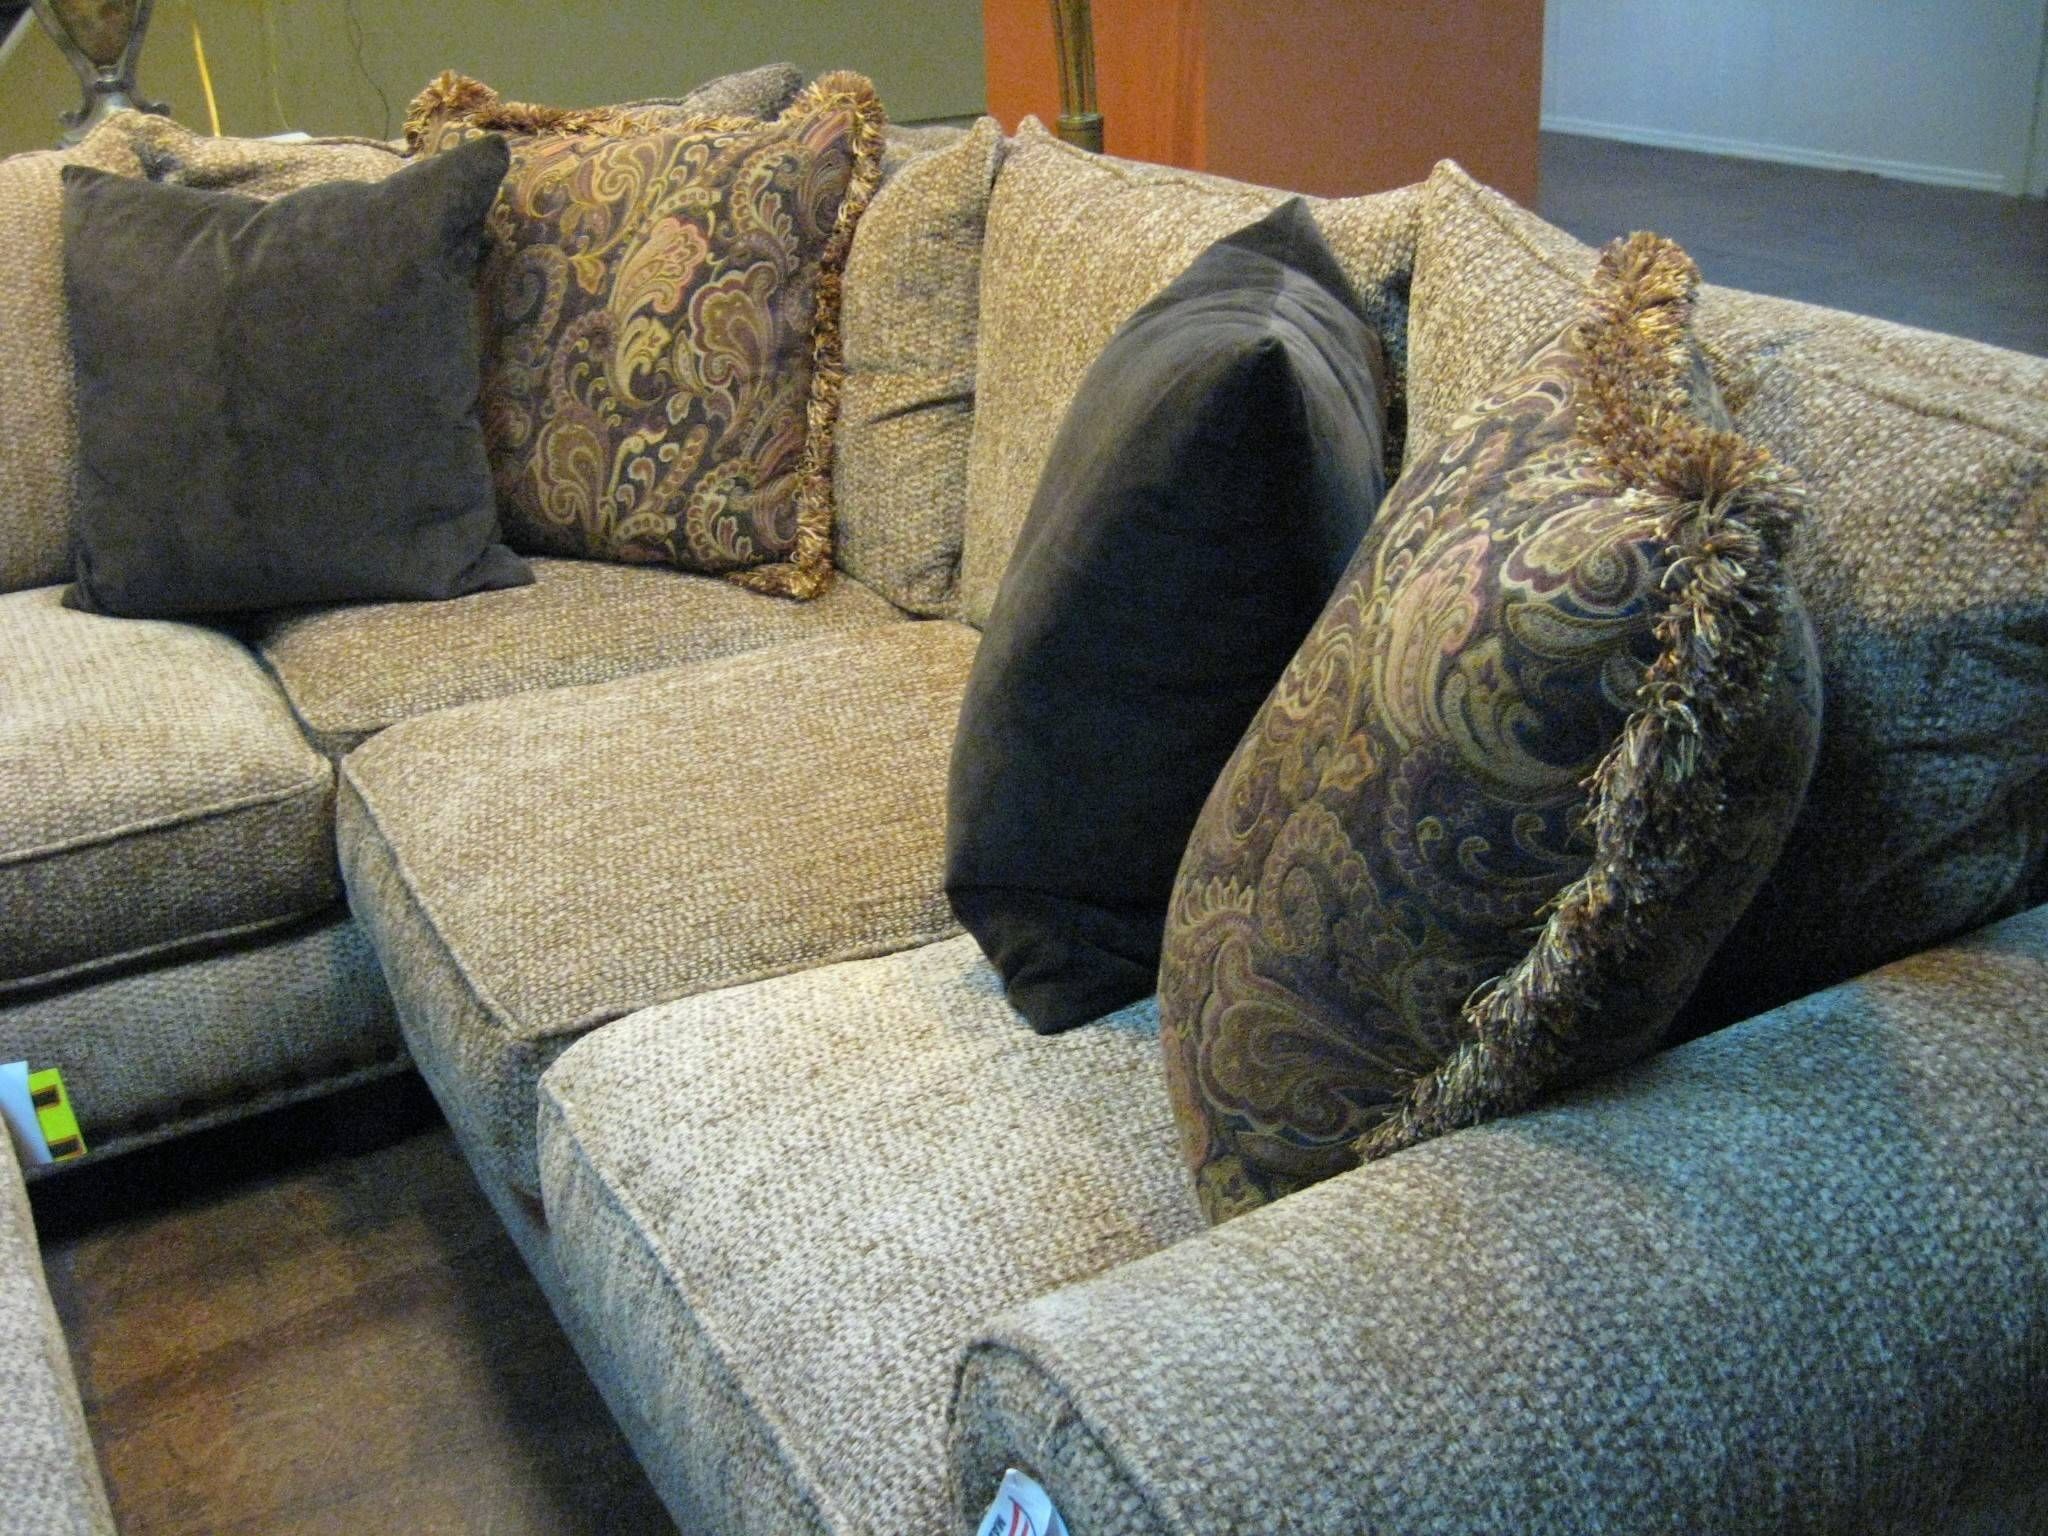 Down Filled Sofa ~ Flotsam Pertaining To Down Filled Sofas And Sectionals (View 5 of 30)